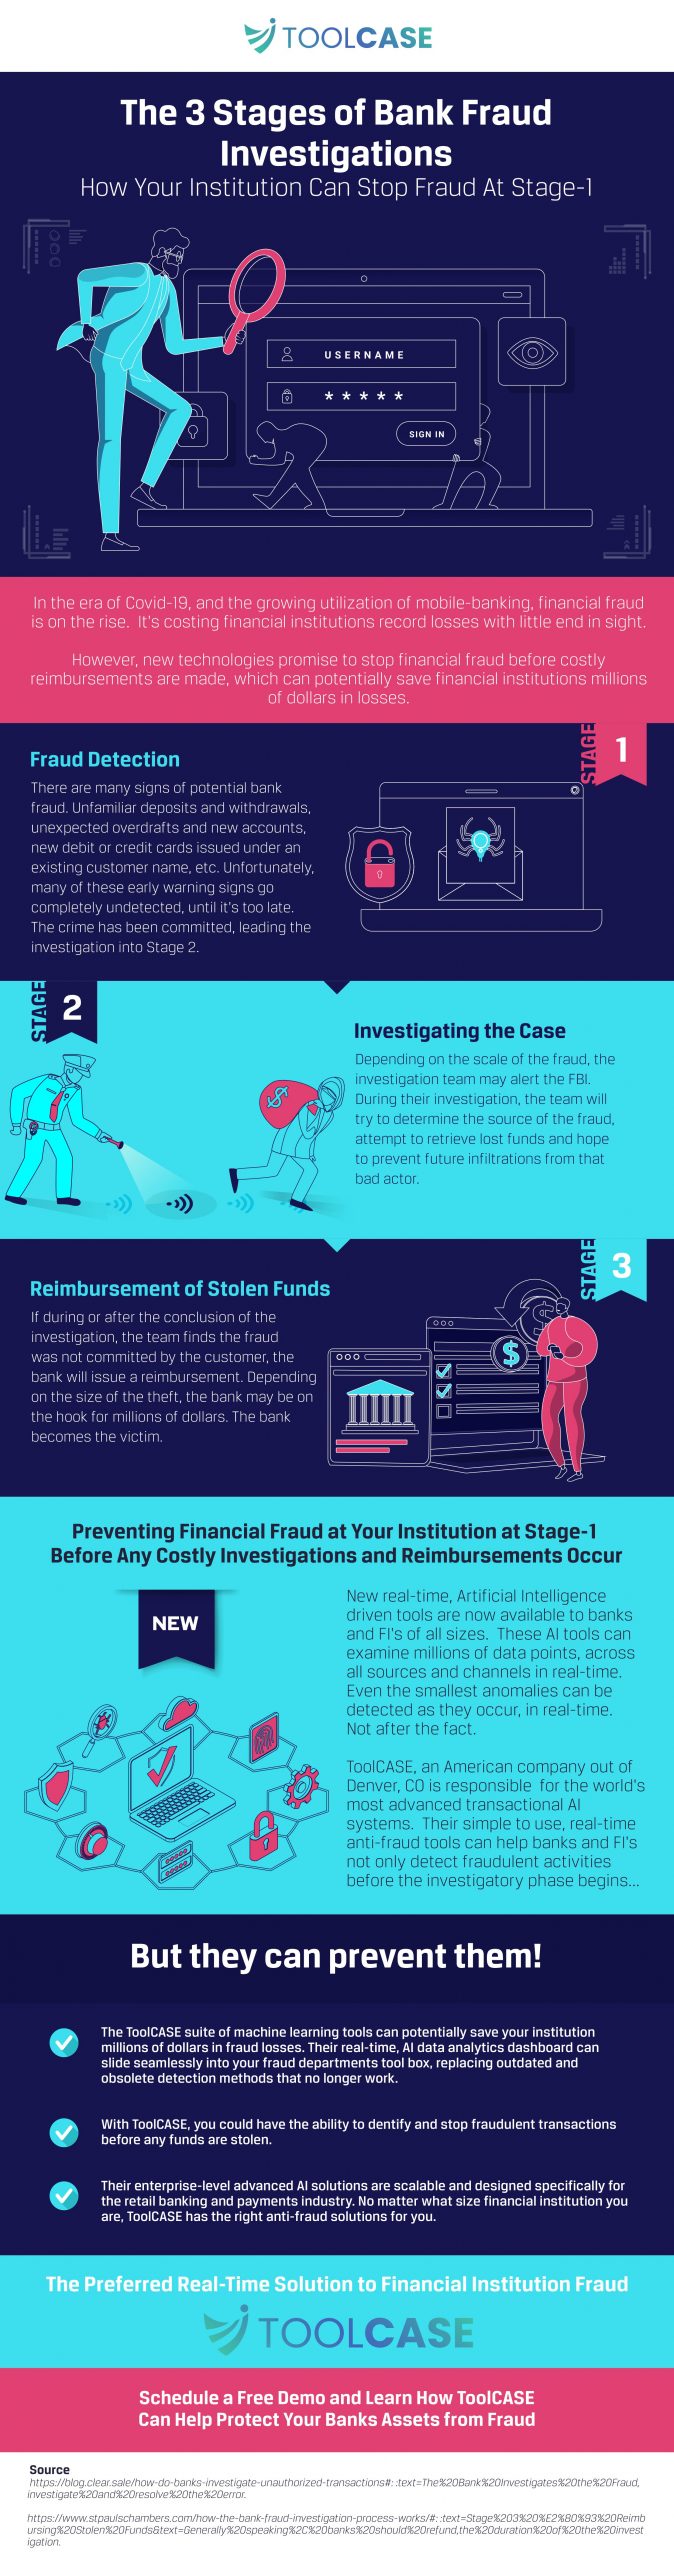 The 3 Stages of Bank Fraud Investigations How Your Institution Can Stop Fraud At Stage-1